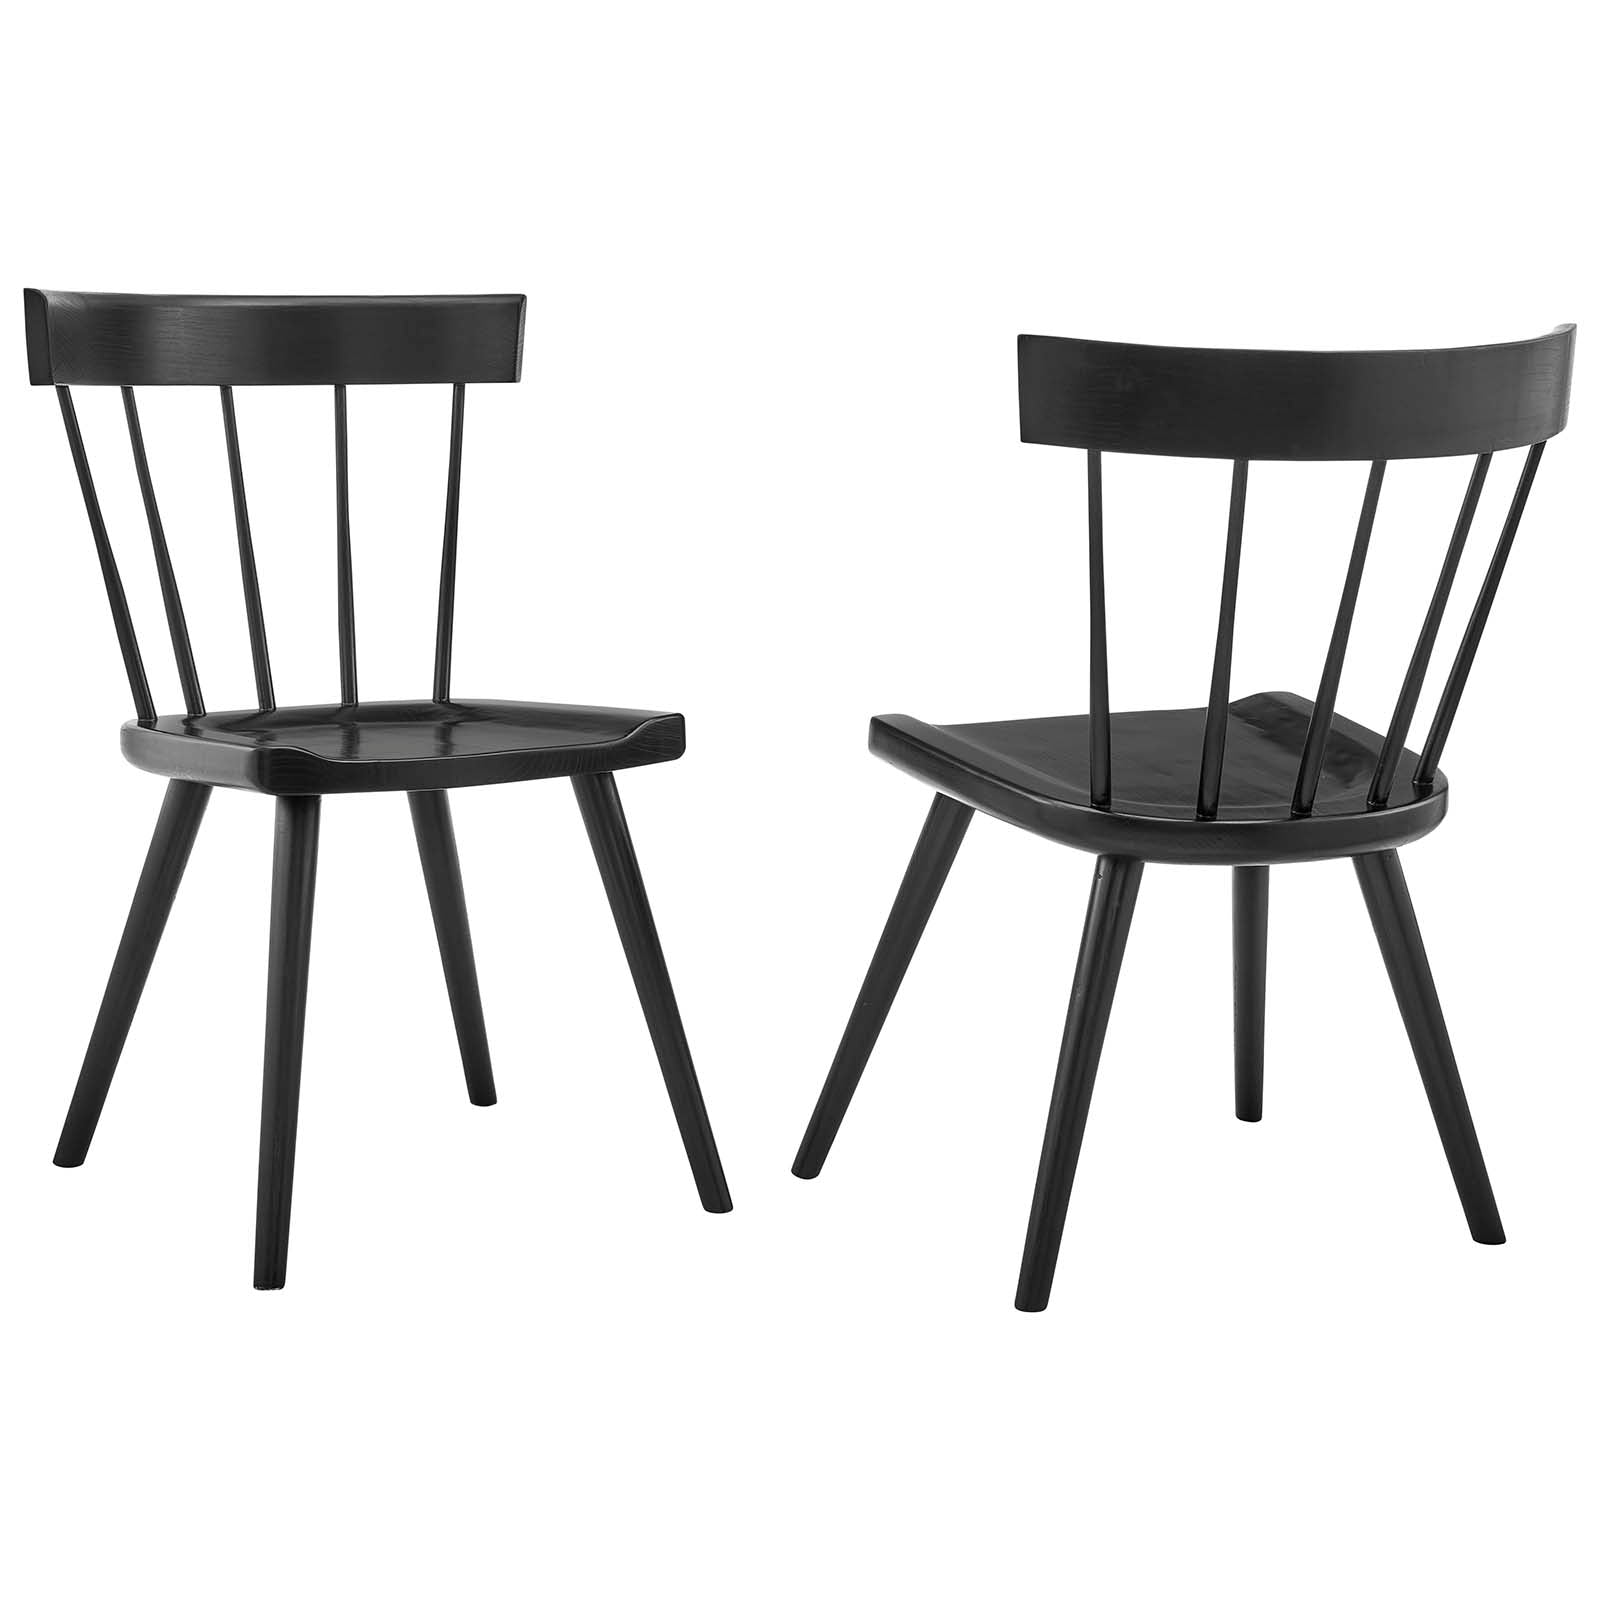 Sutter Wood Dining Side Chair Set of 2 - East Shore Modern Home Furnishings